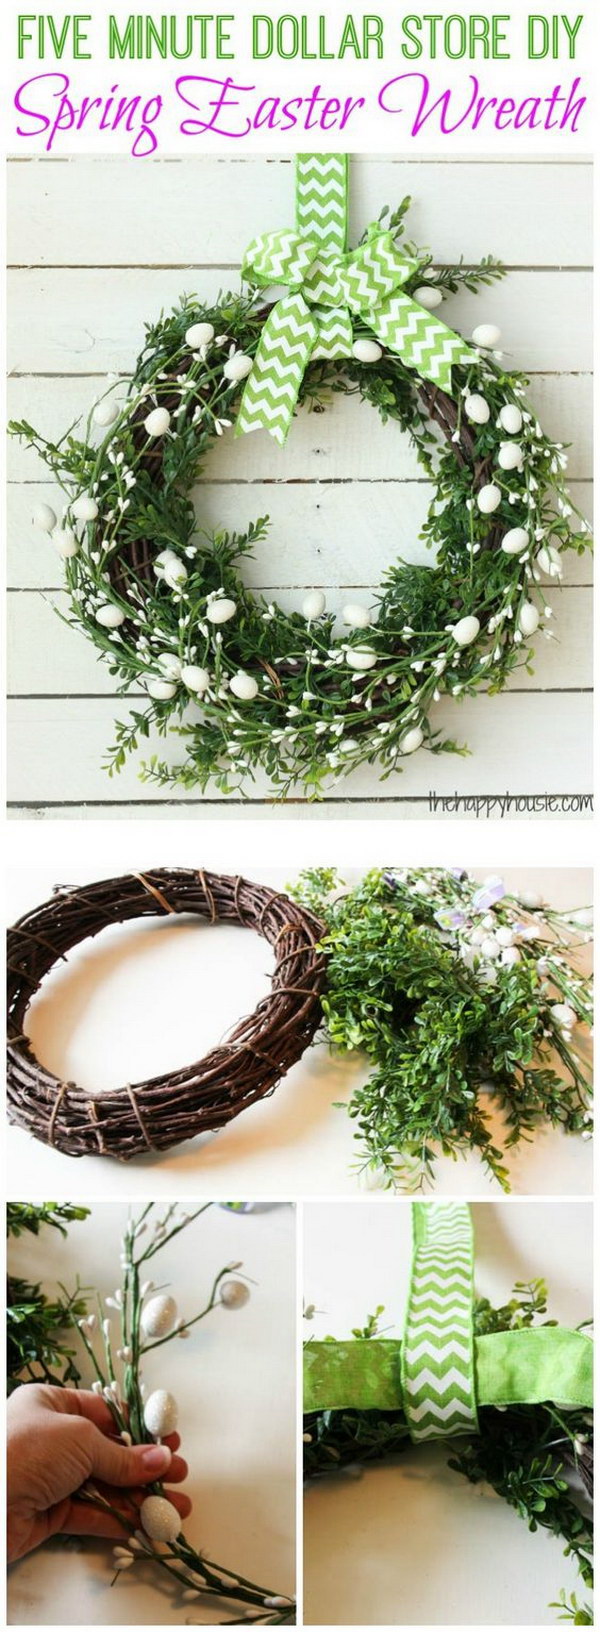 5 Minutes Dollar Store DIY Spring Easter Wreath 